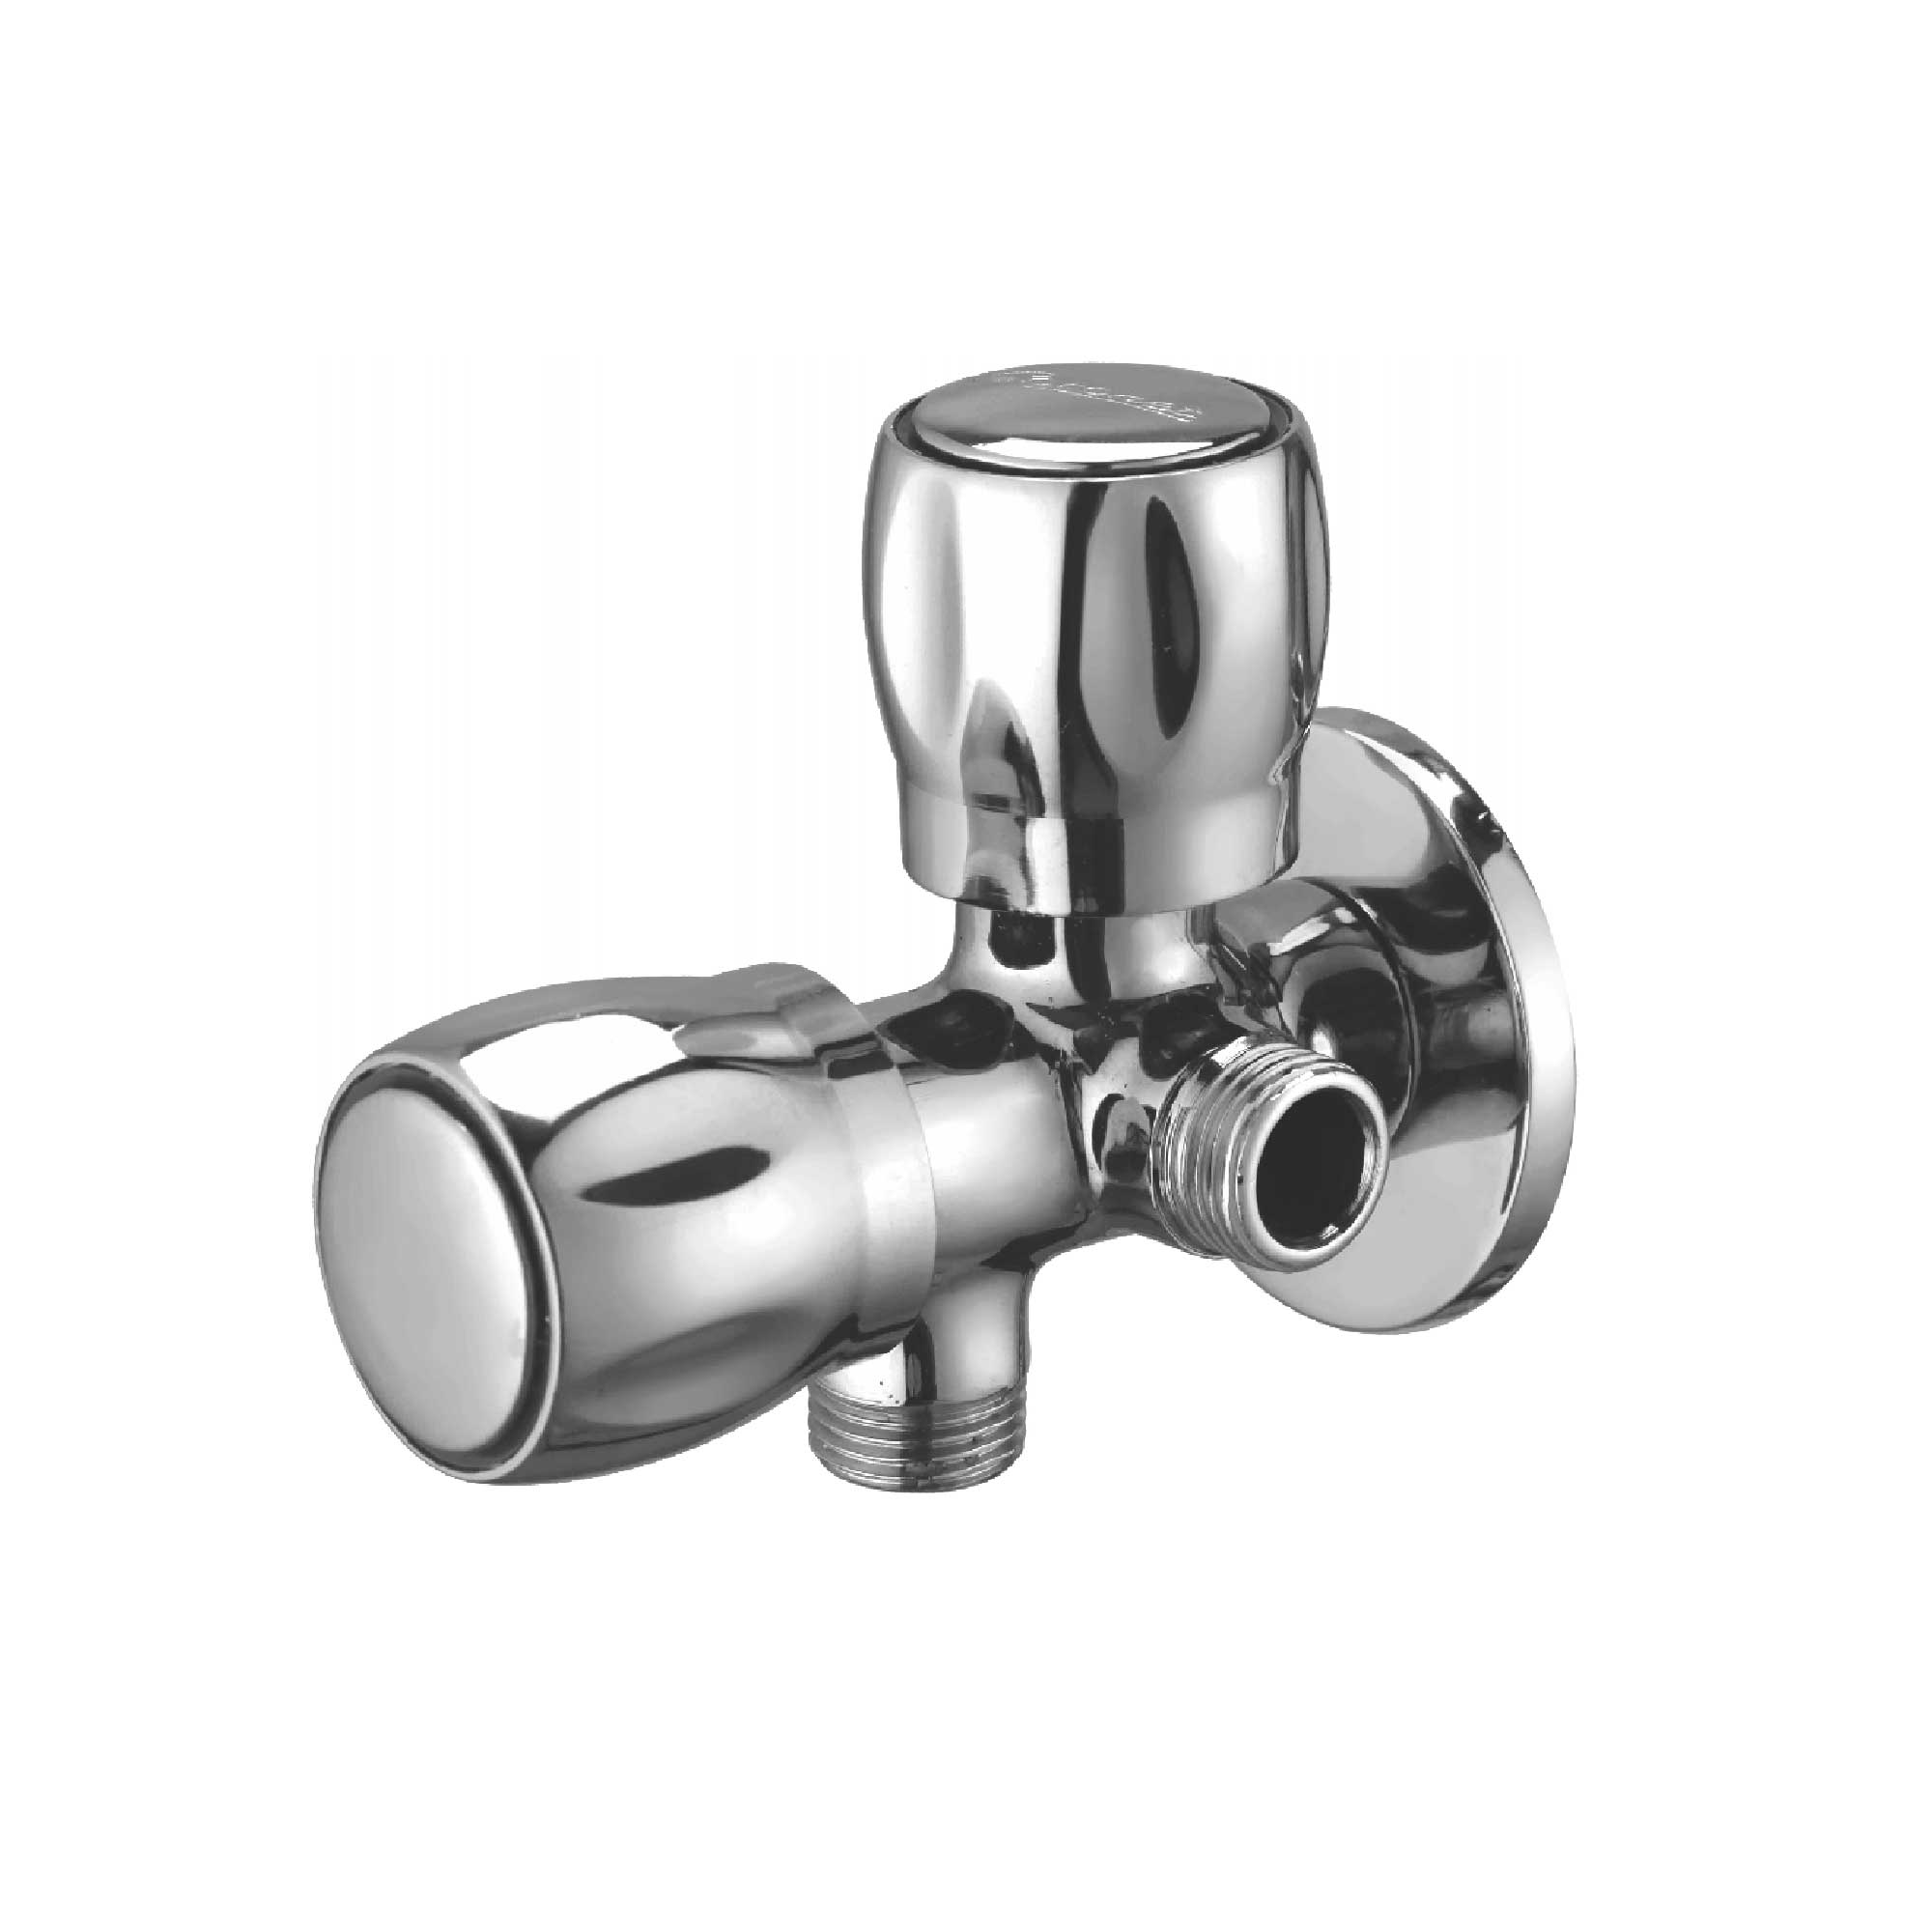 Angle Valve Two Way With Cp Flange